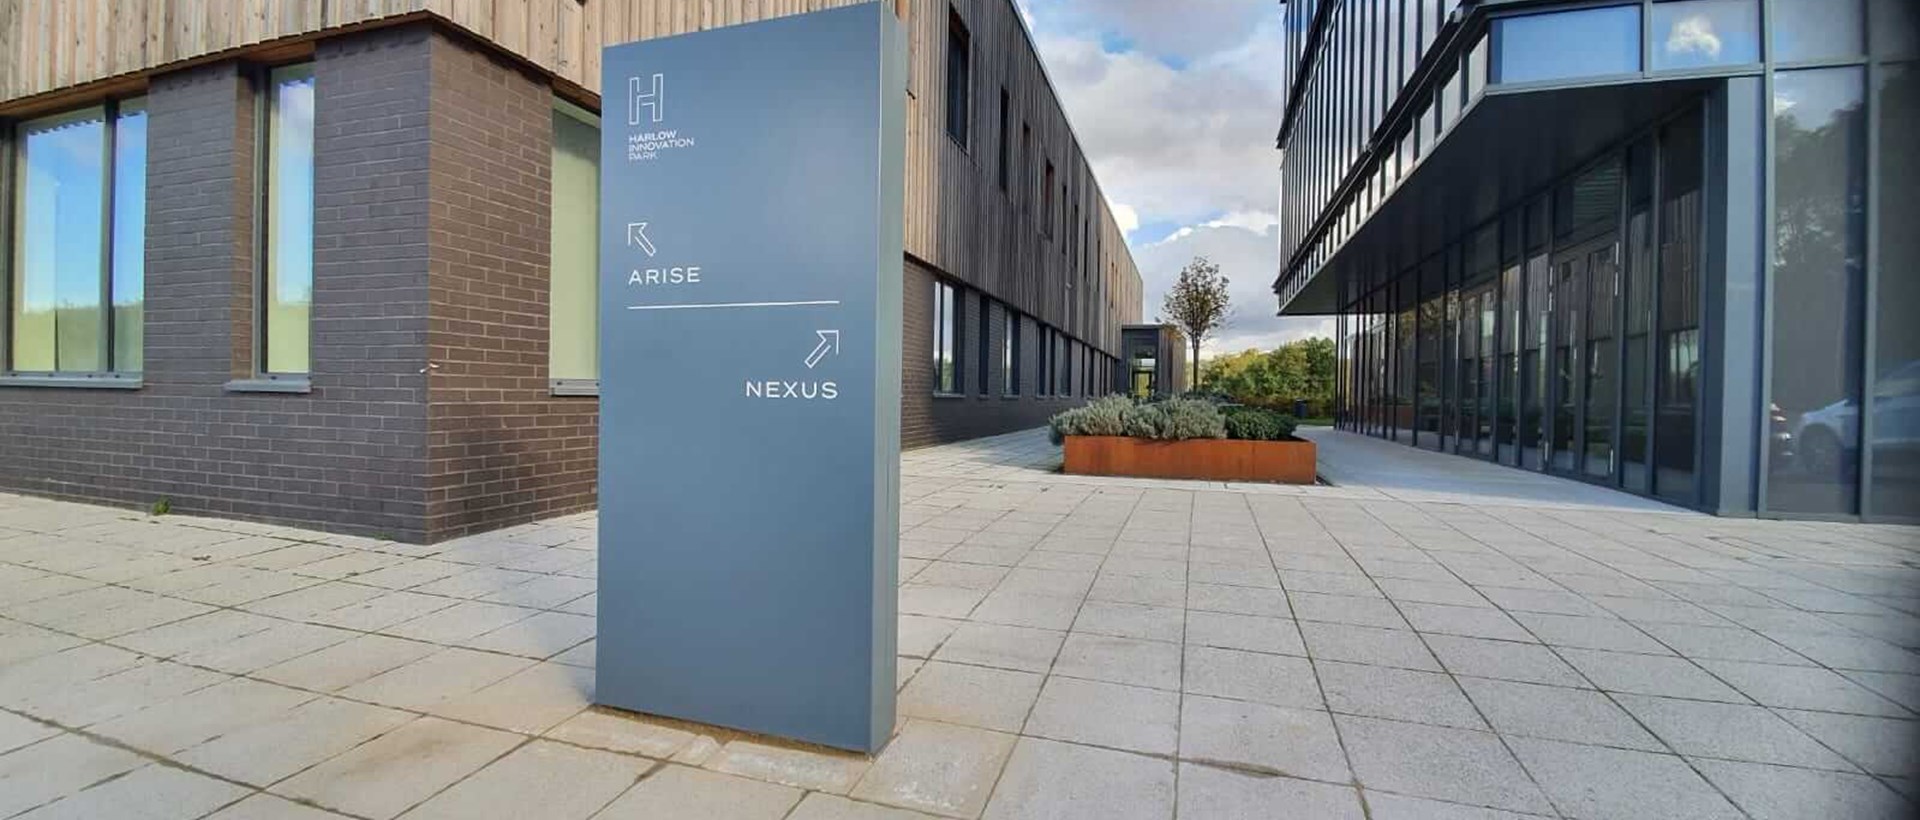 Directional Totem Sign Nexus And Arise Buildings Harlow Innovation Park